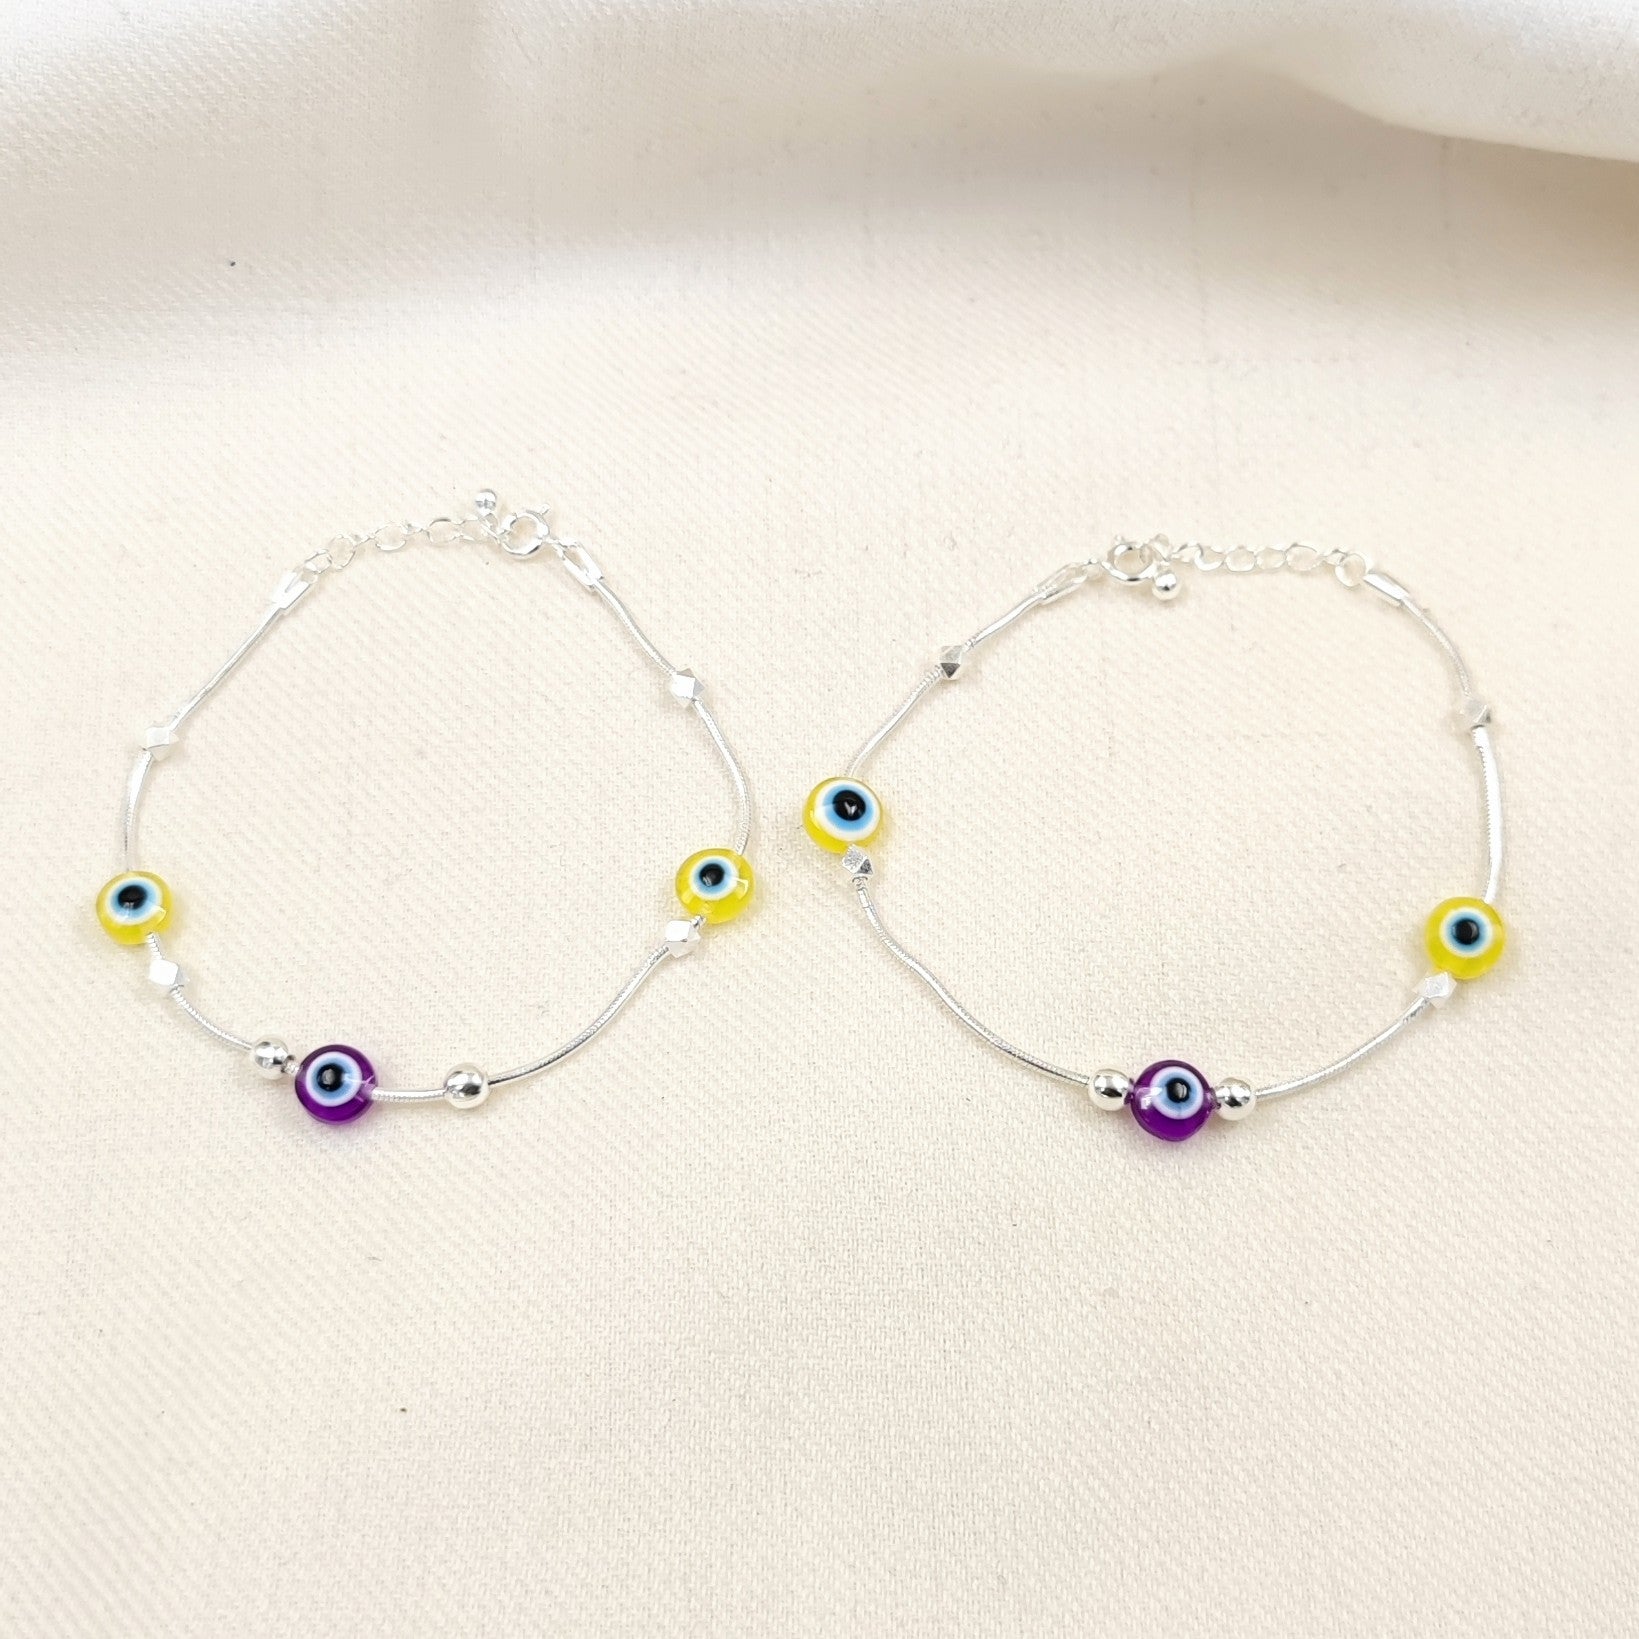 Silver Jewelry Anklets by Jauhri 92.5 Silver - Evil Eye Purple Yellow Anklets - Kids